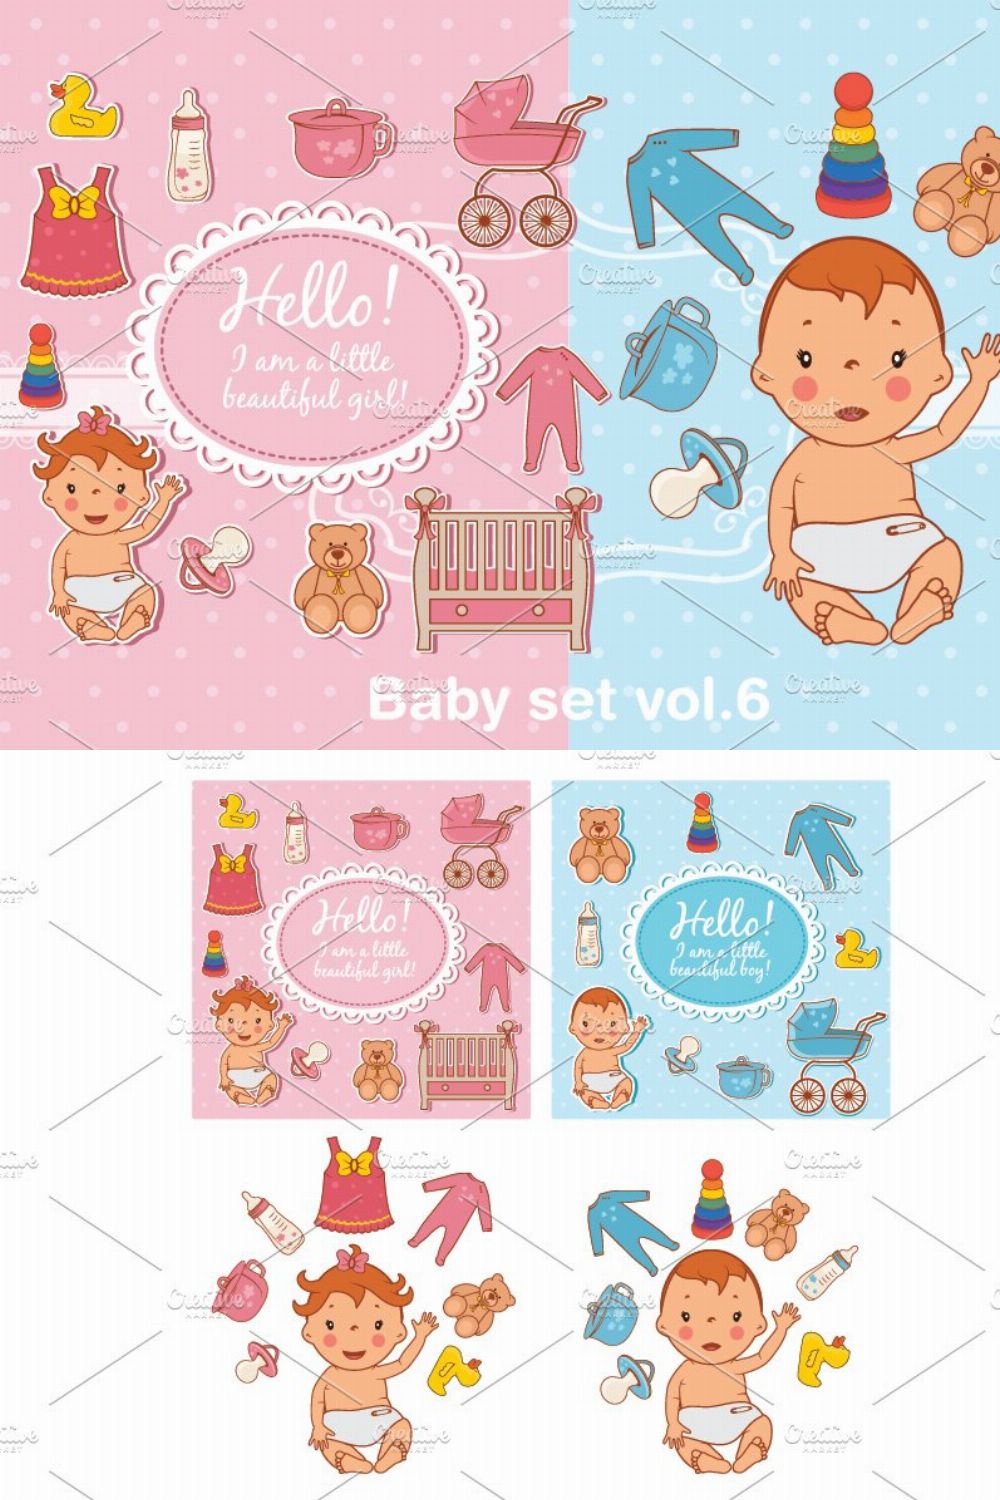 Baby set vol.6 pinterest preview image.